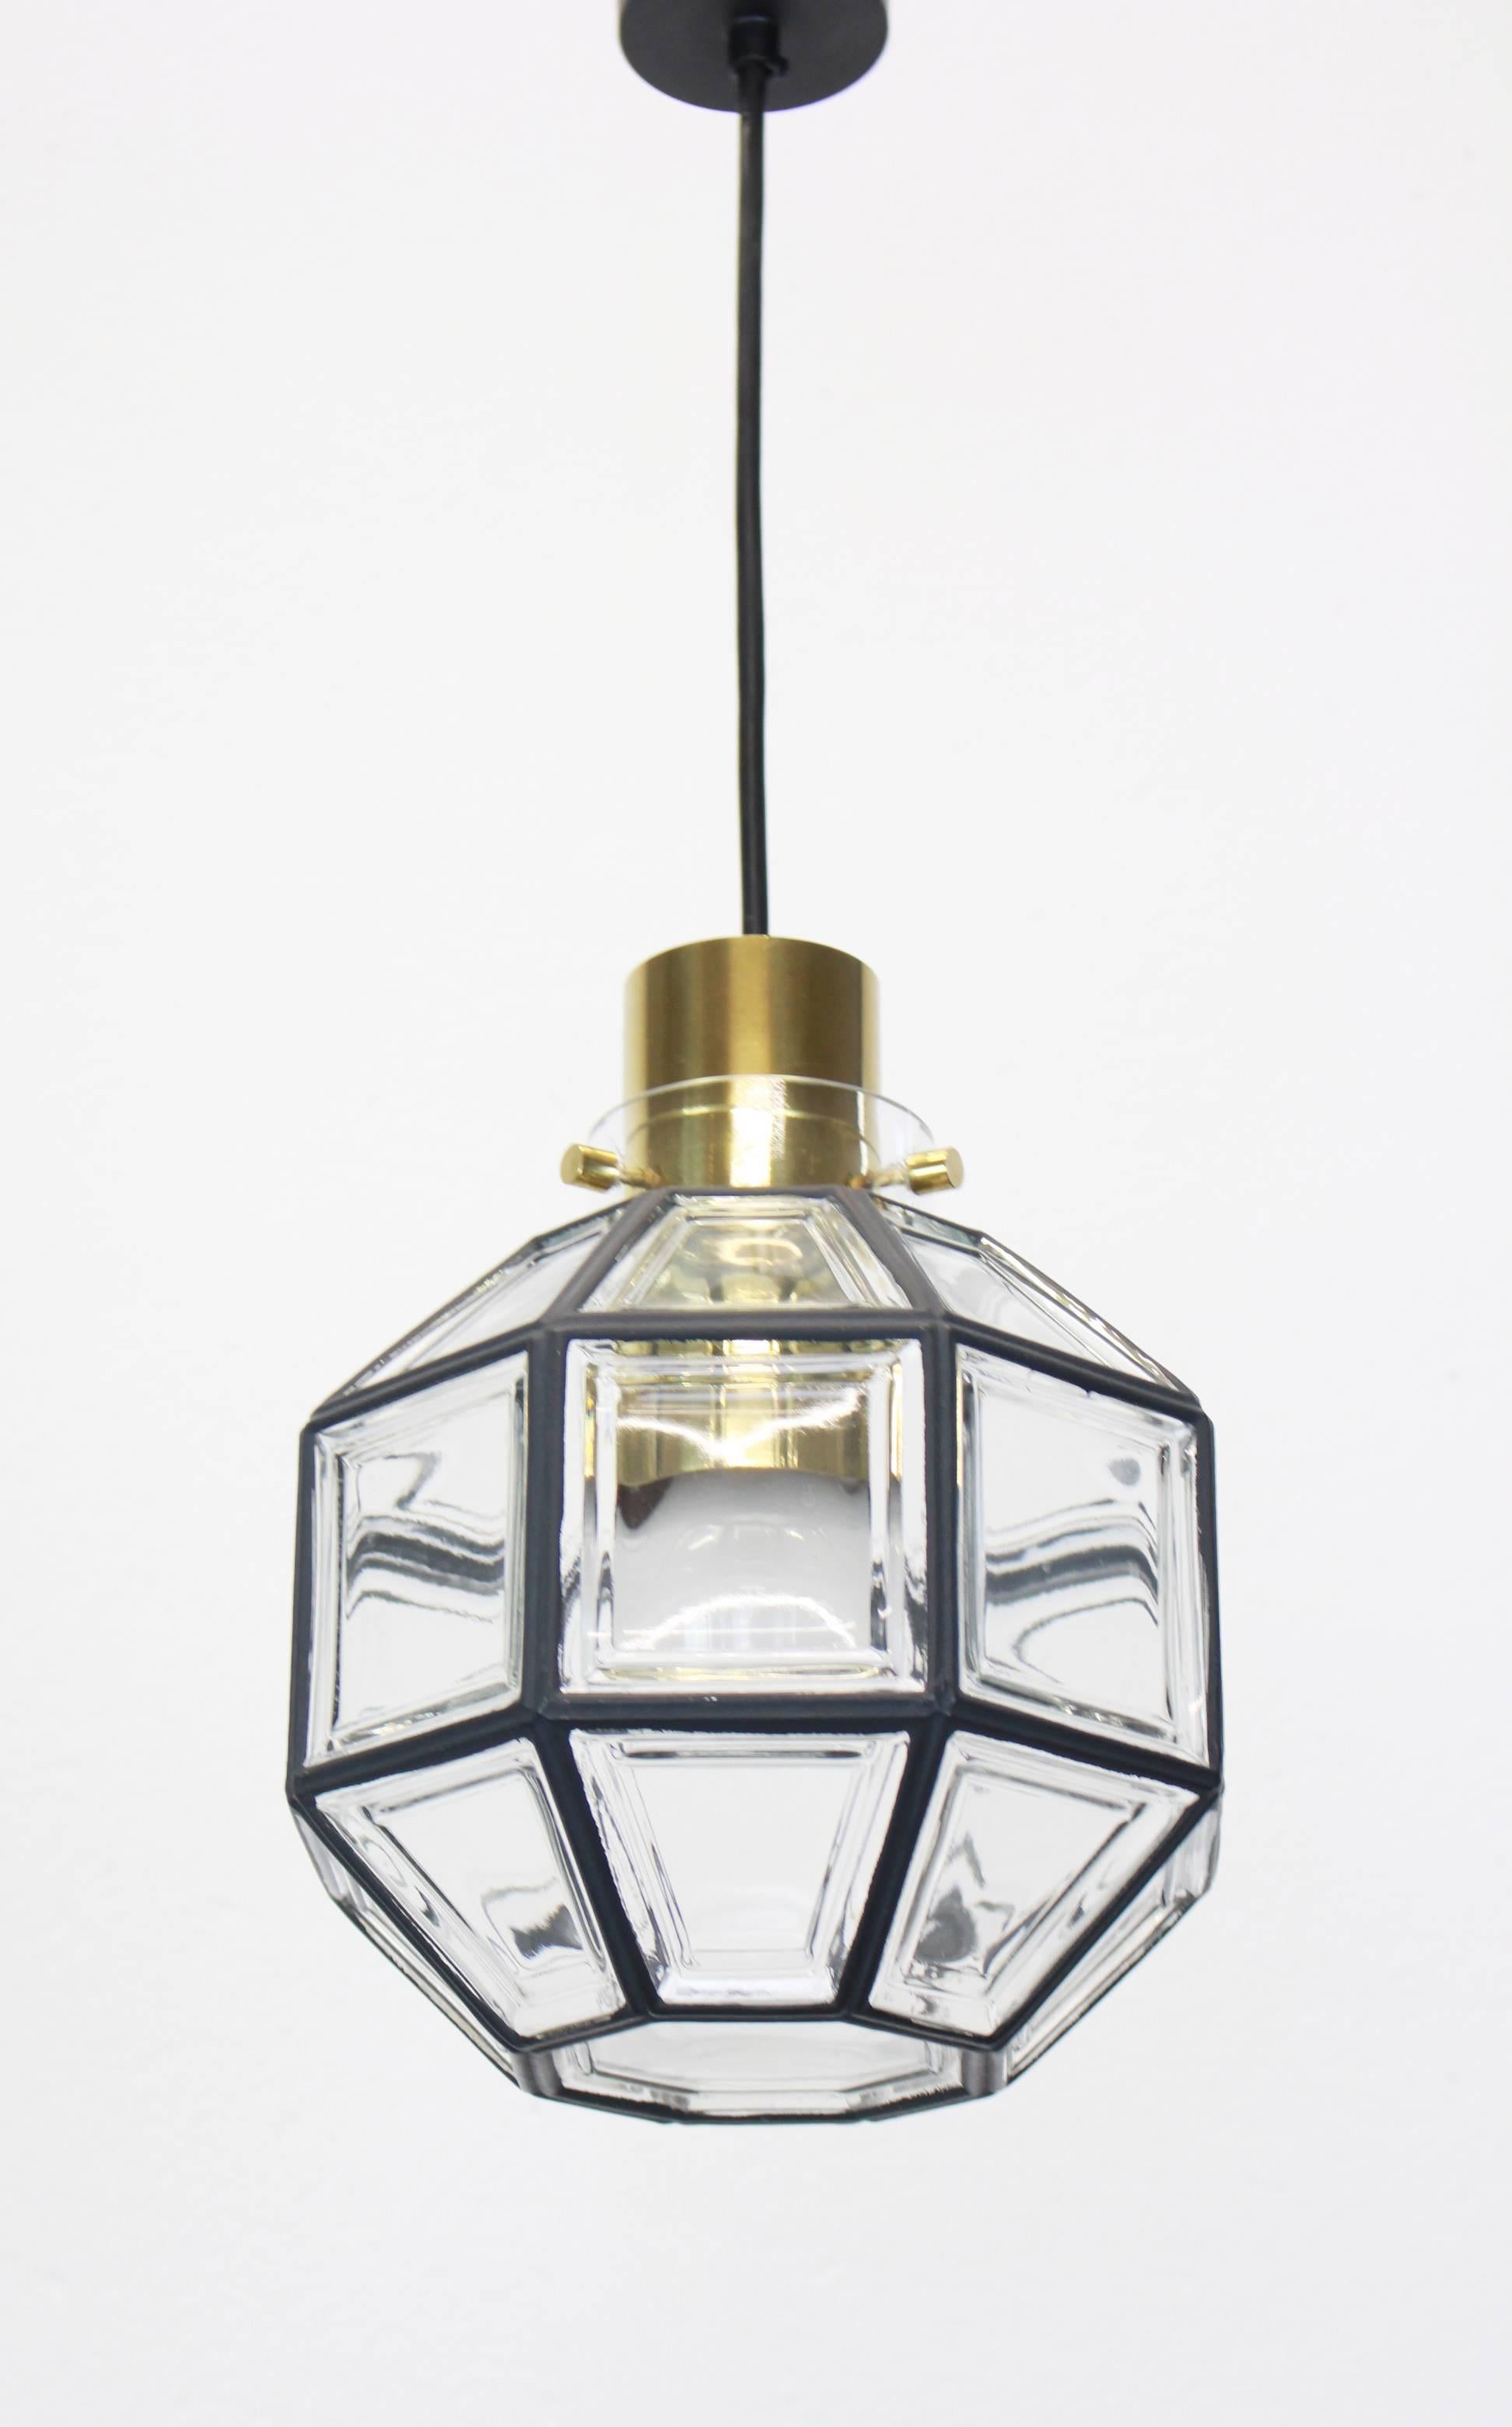 Set of four Minimalist iron and clear glass pendant lights manufactured by Limburg Glashütte, Germany, circa 1960-1969. Octagonal shaped lantern and multi-faceted clear glass.

Sockets: Each – One x E27 standard bulb.

Please note the price